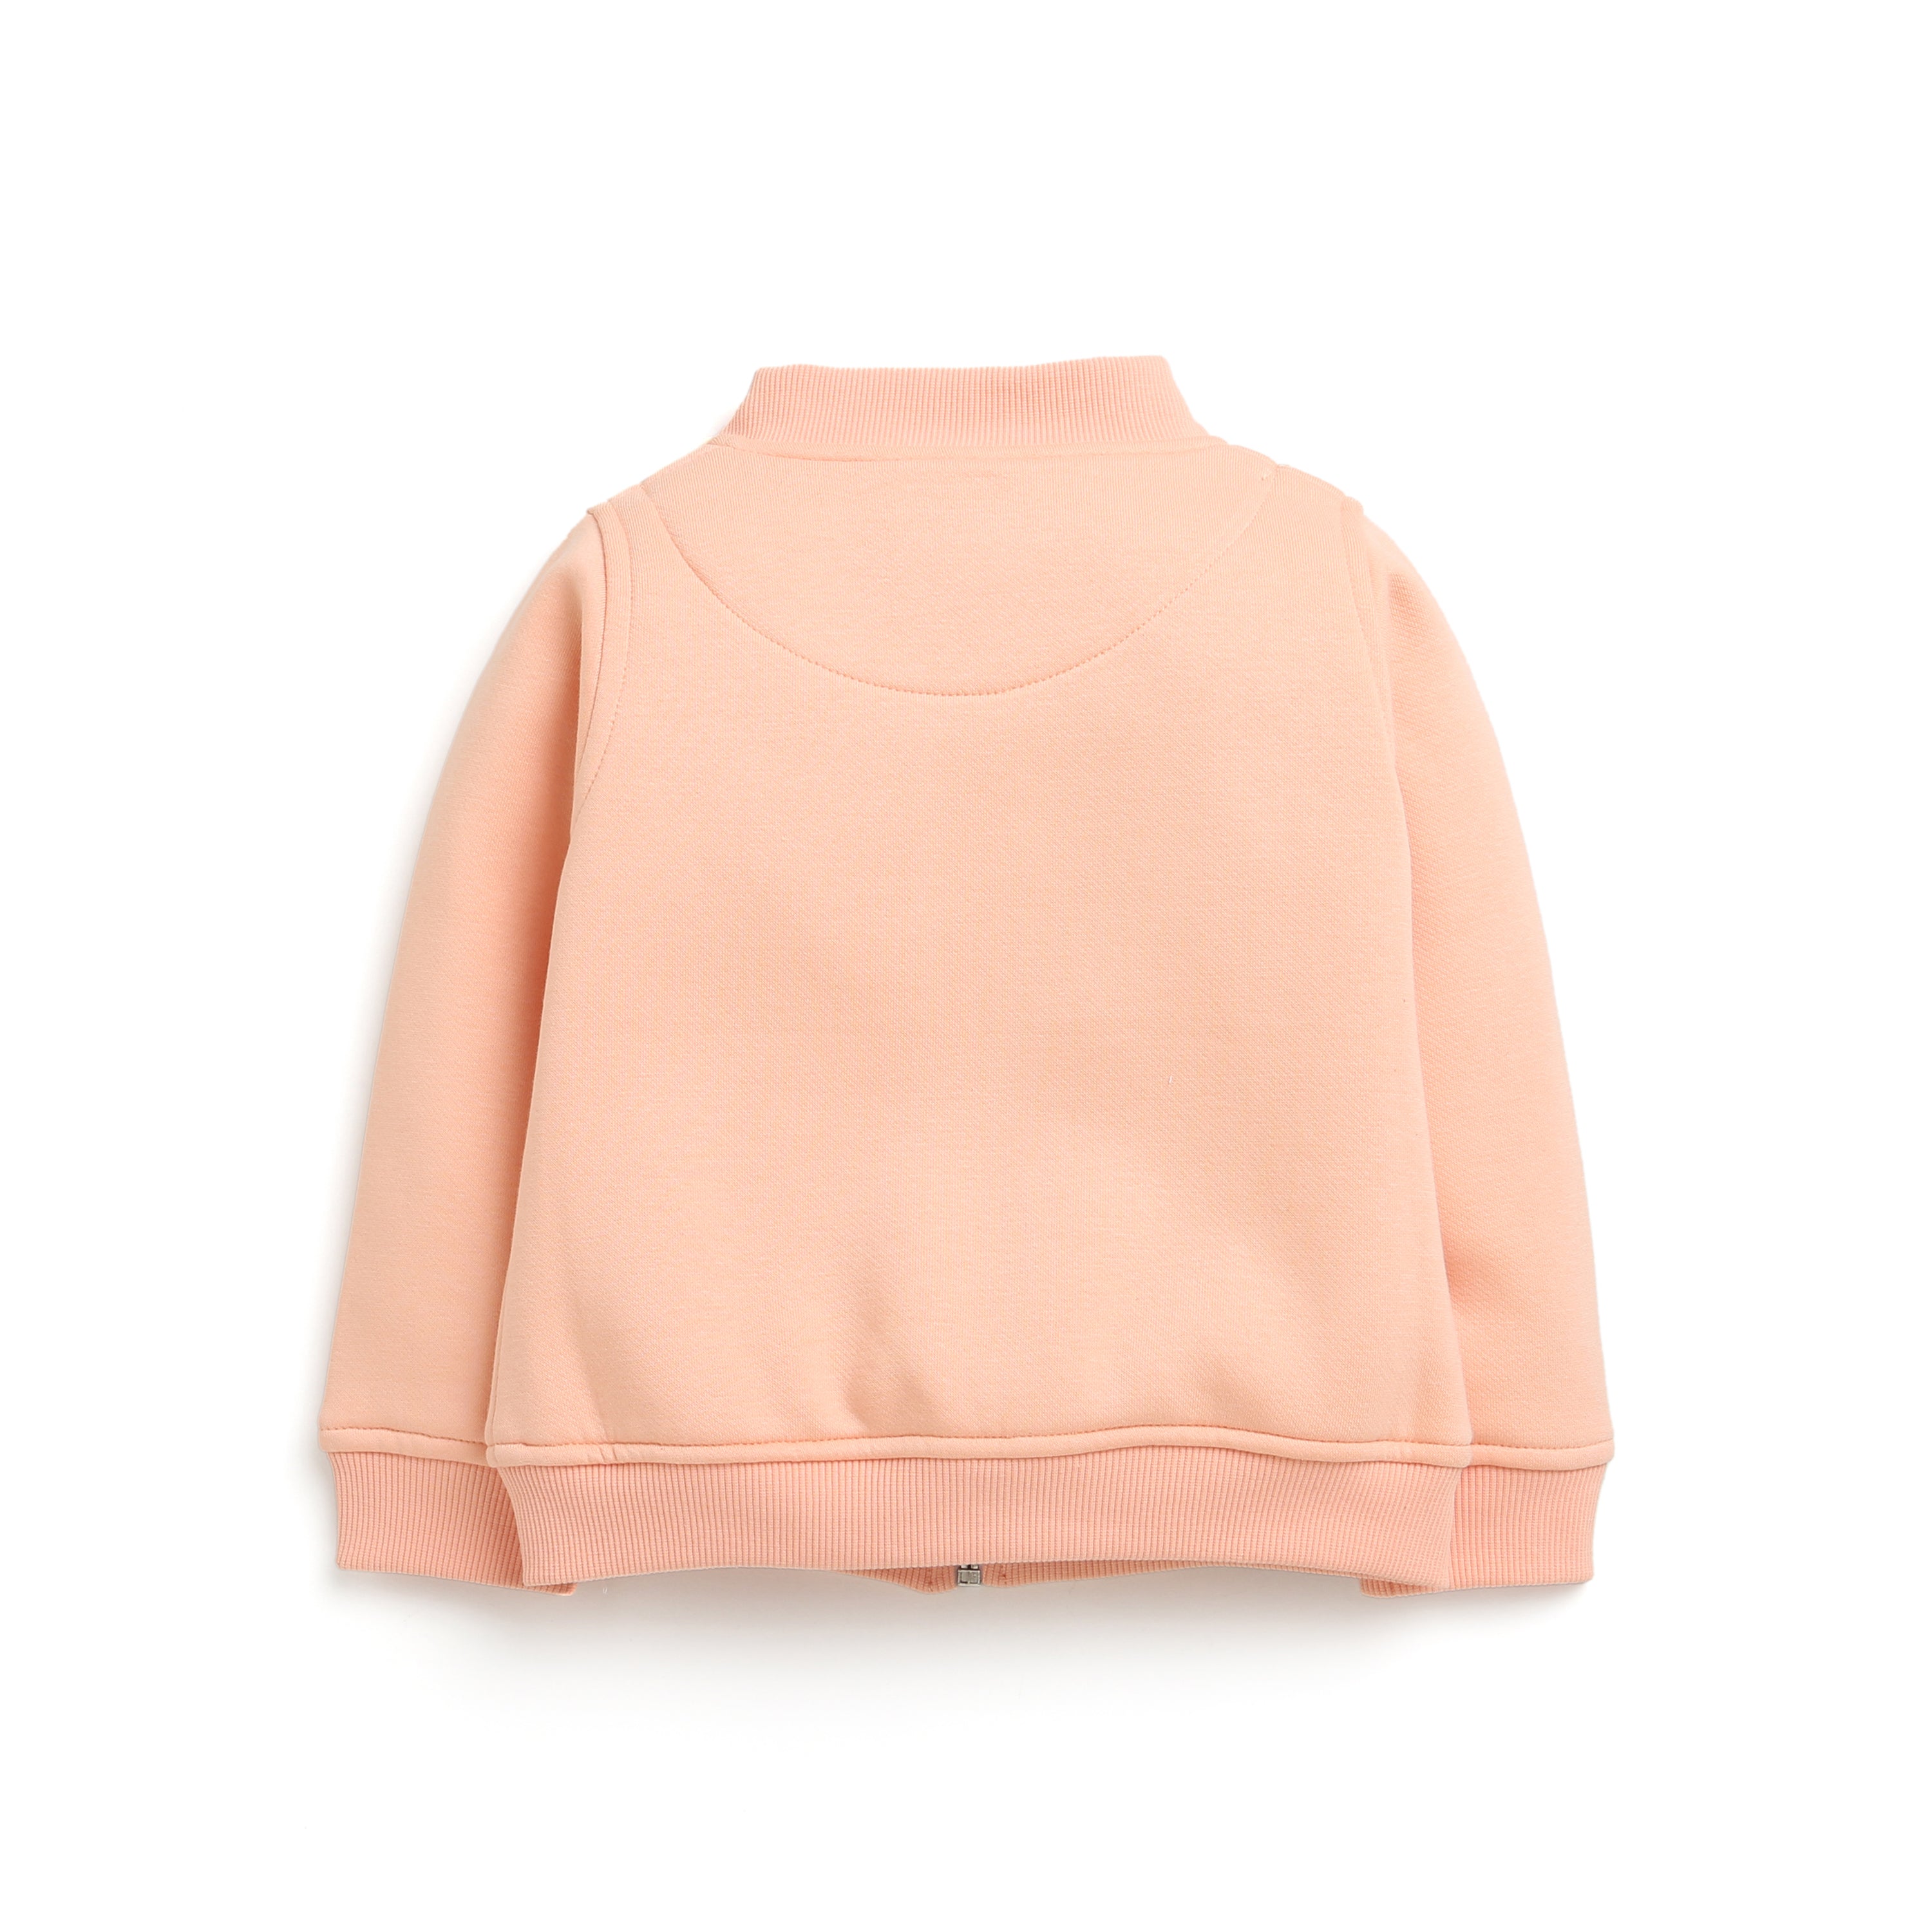 Tiny Girl Basic Zipper Sweatshirt With Front Pockets In Peach